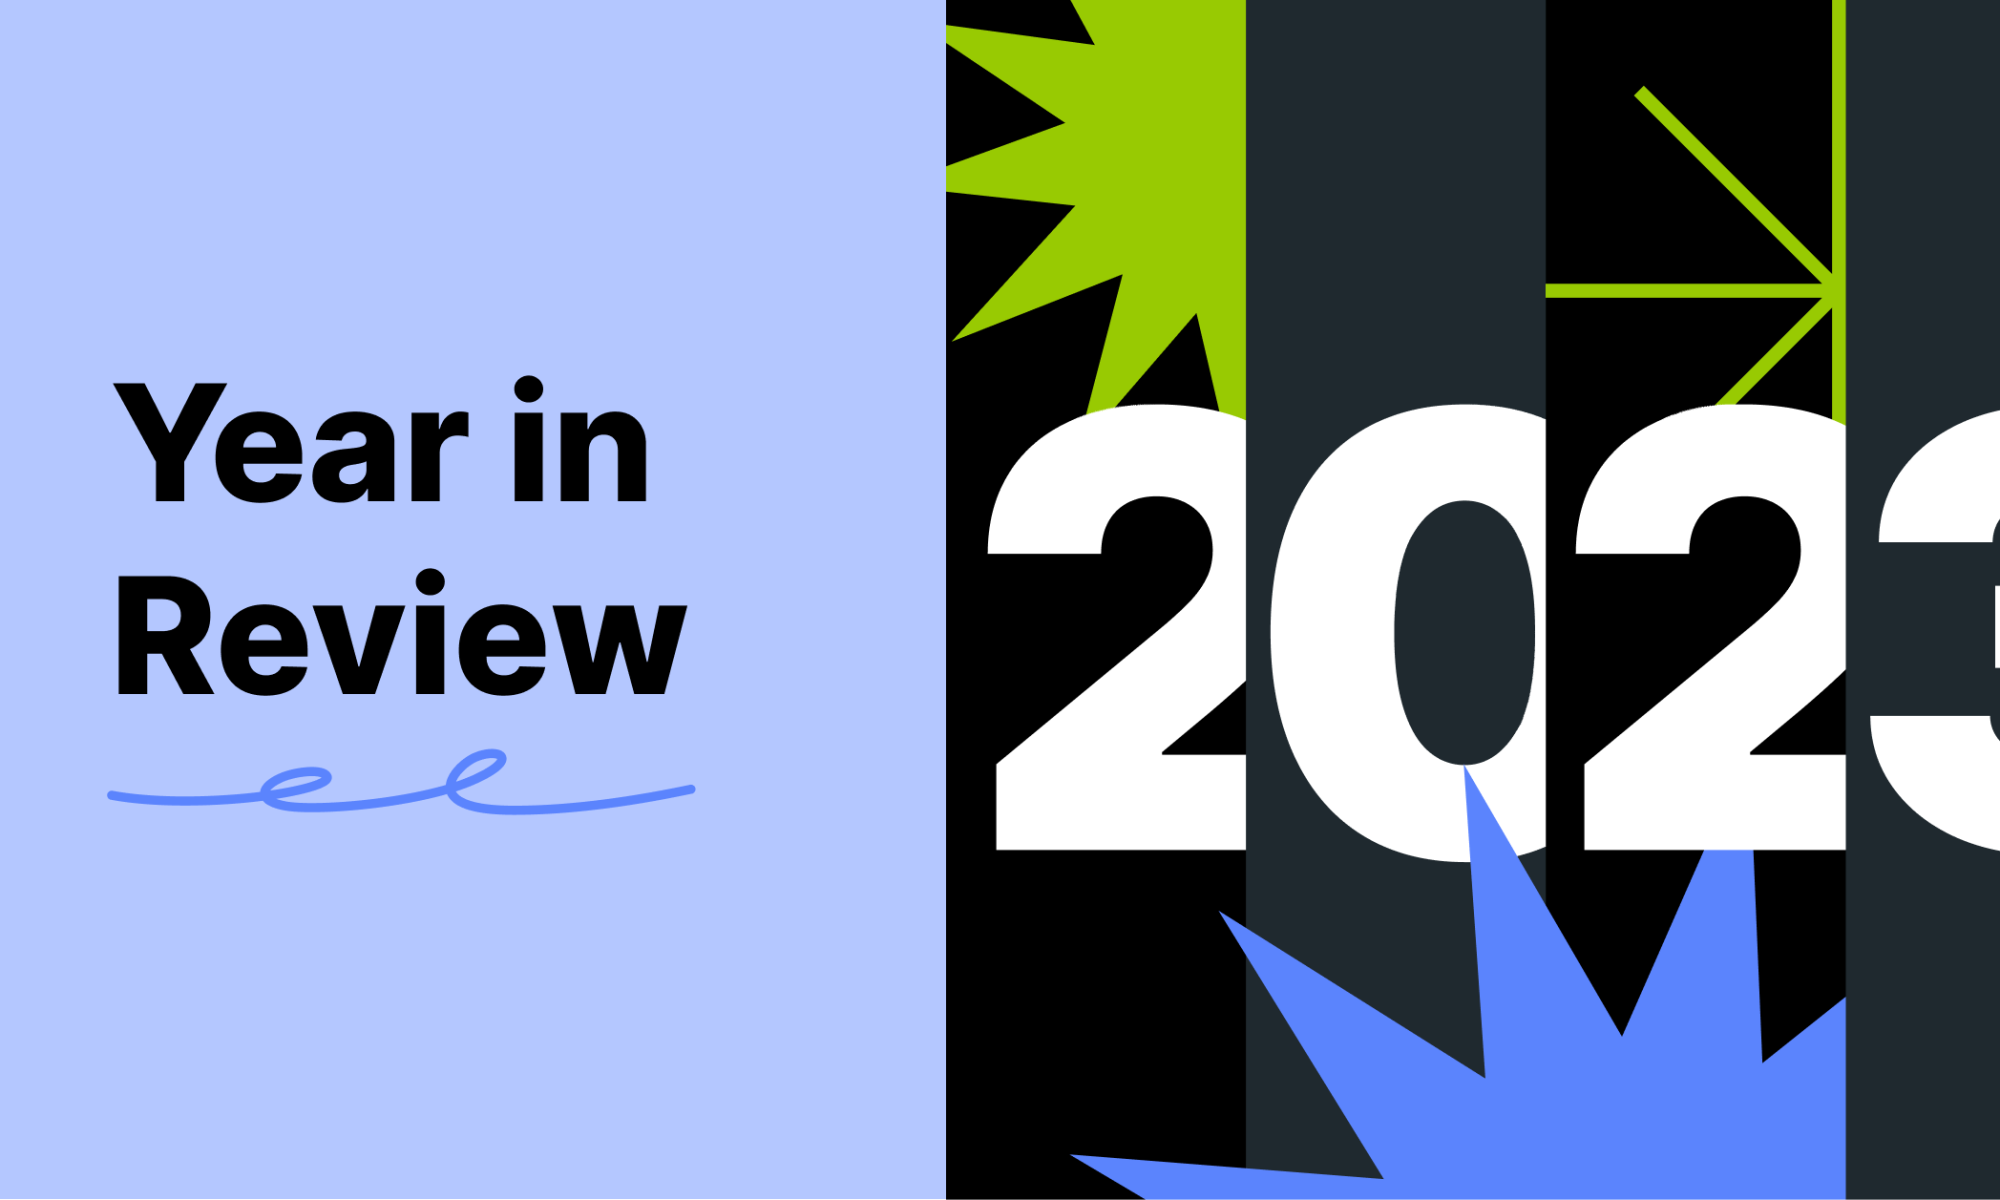 2023 and year in review placed around colourful graphics.